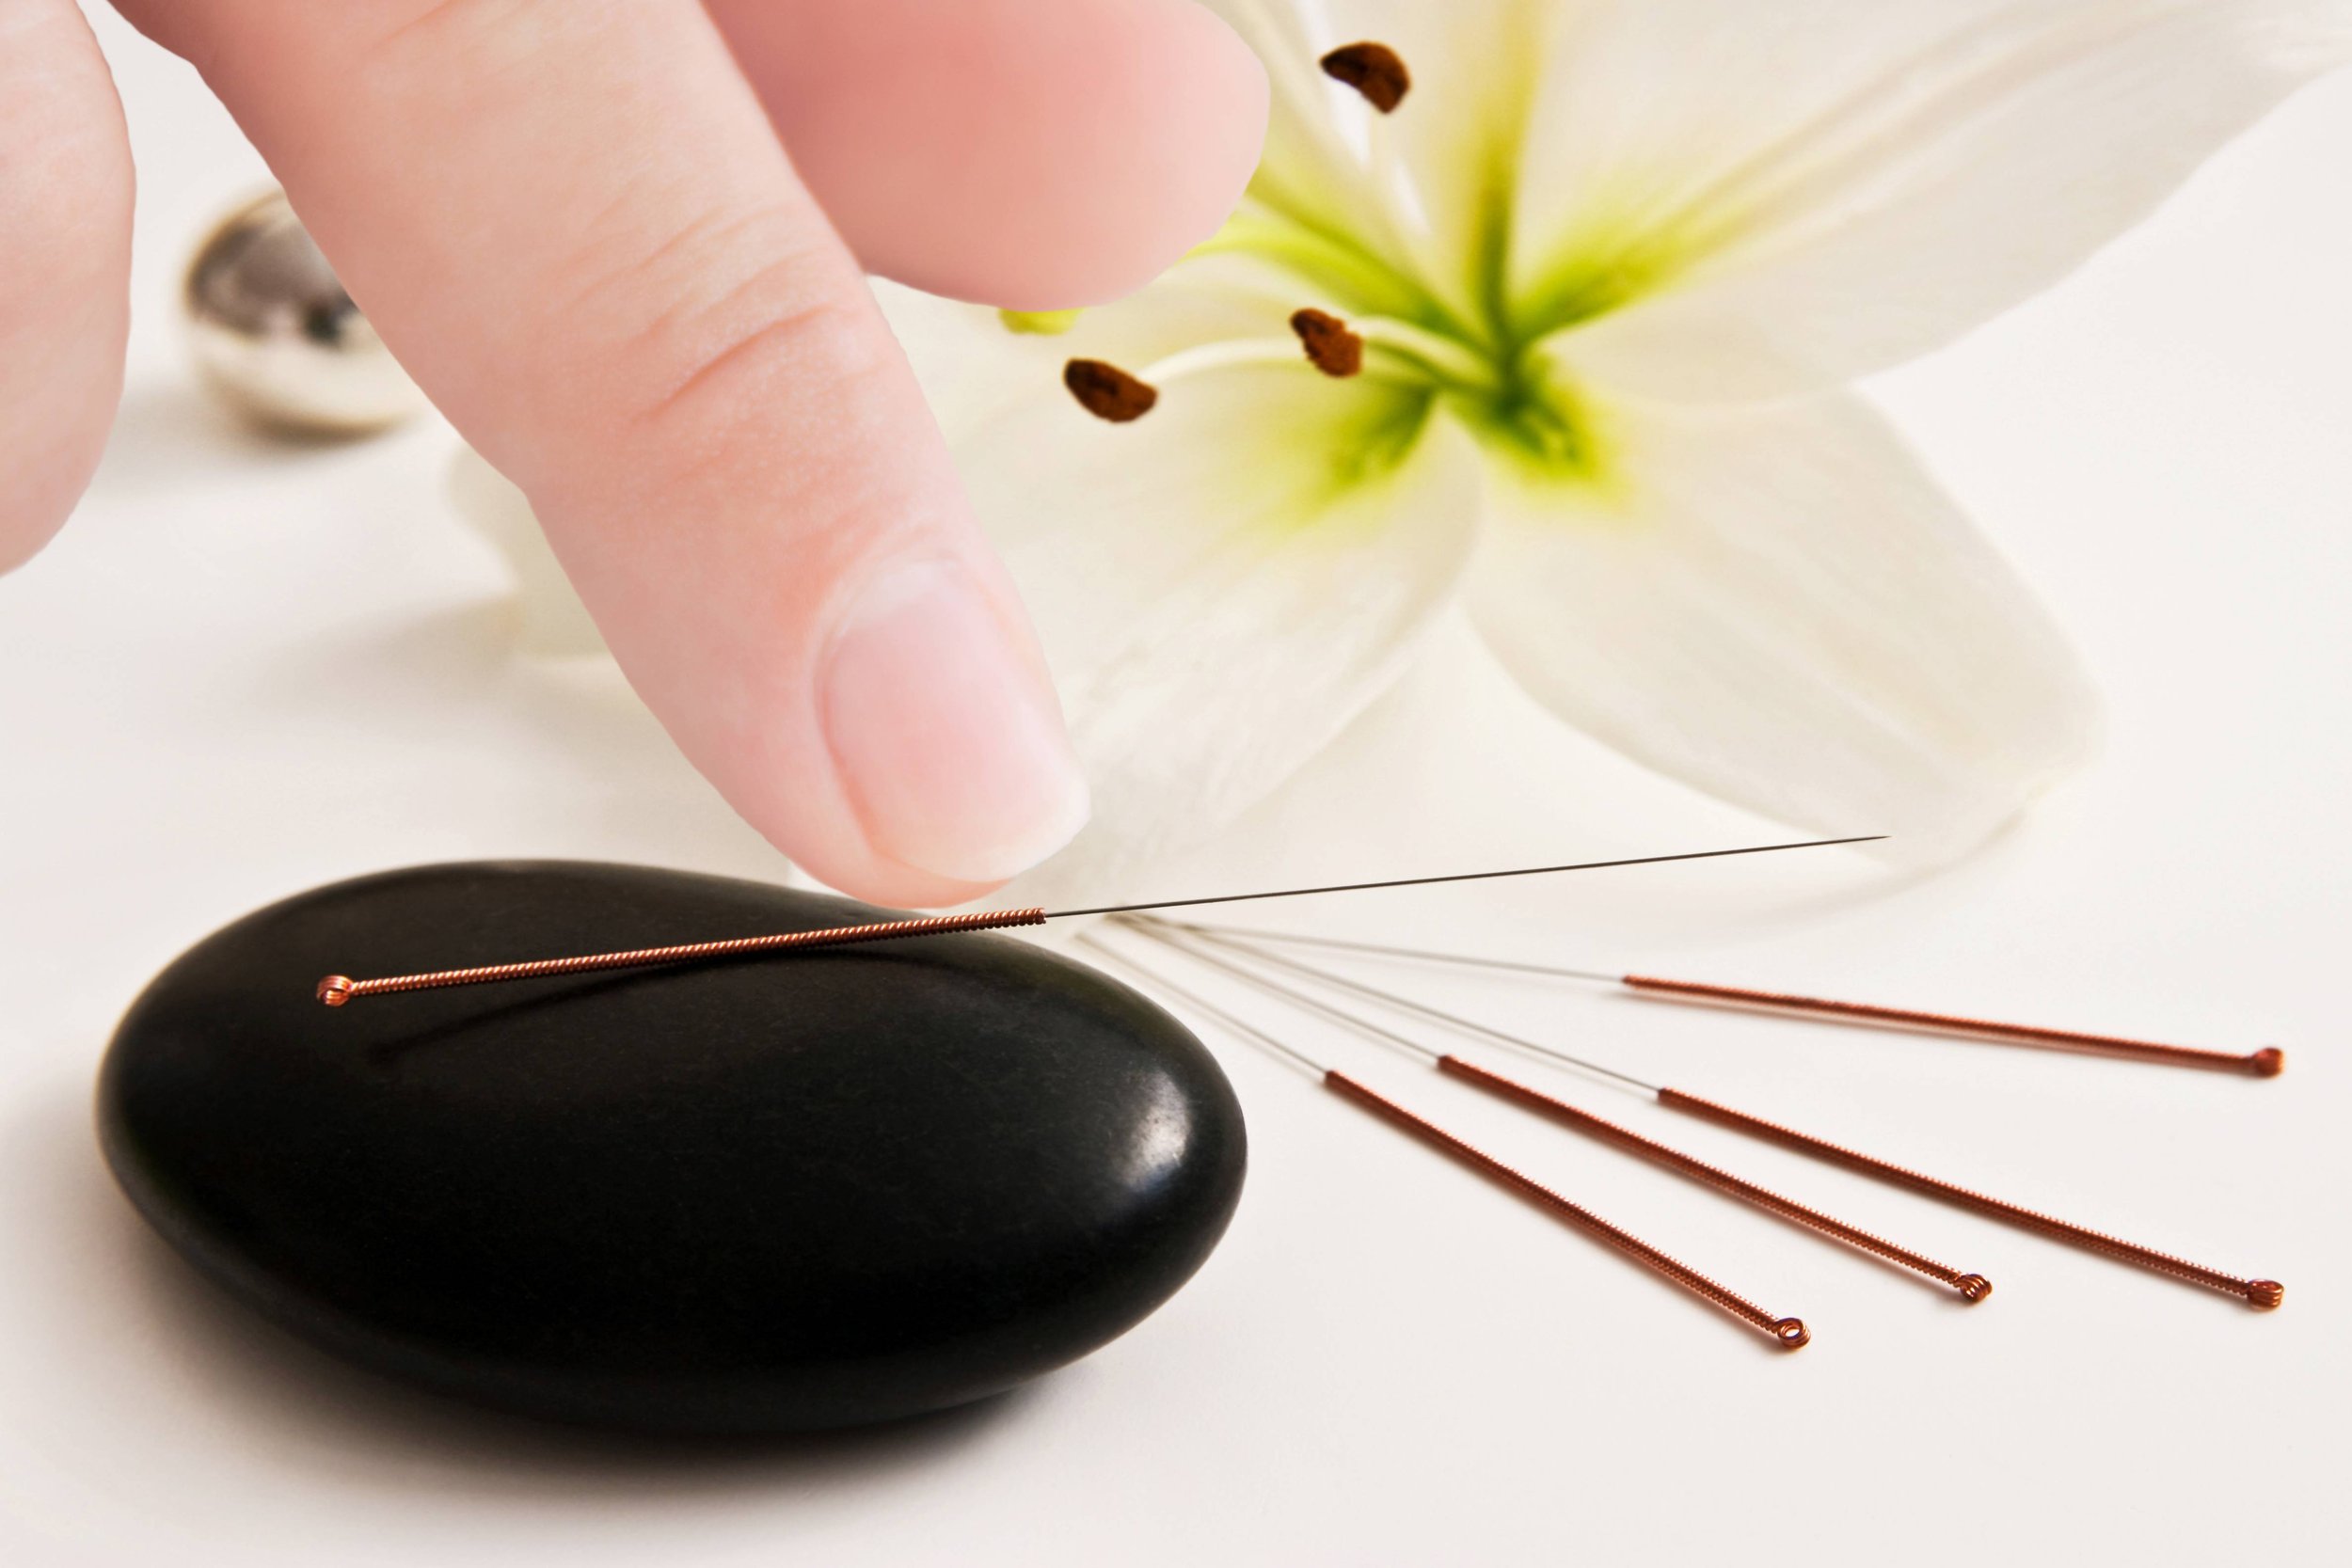 When To Have Acupuncture for Fertility - A Comprehensive Guide